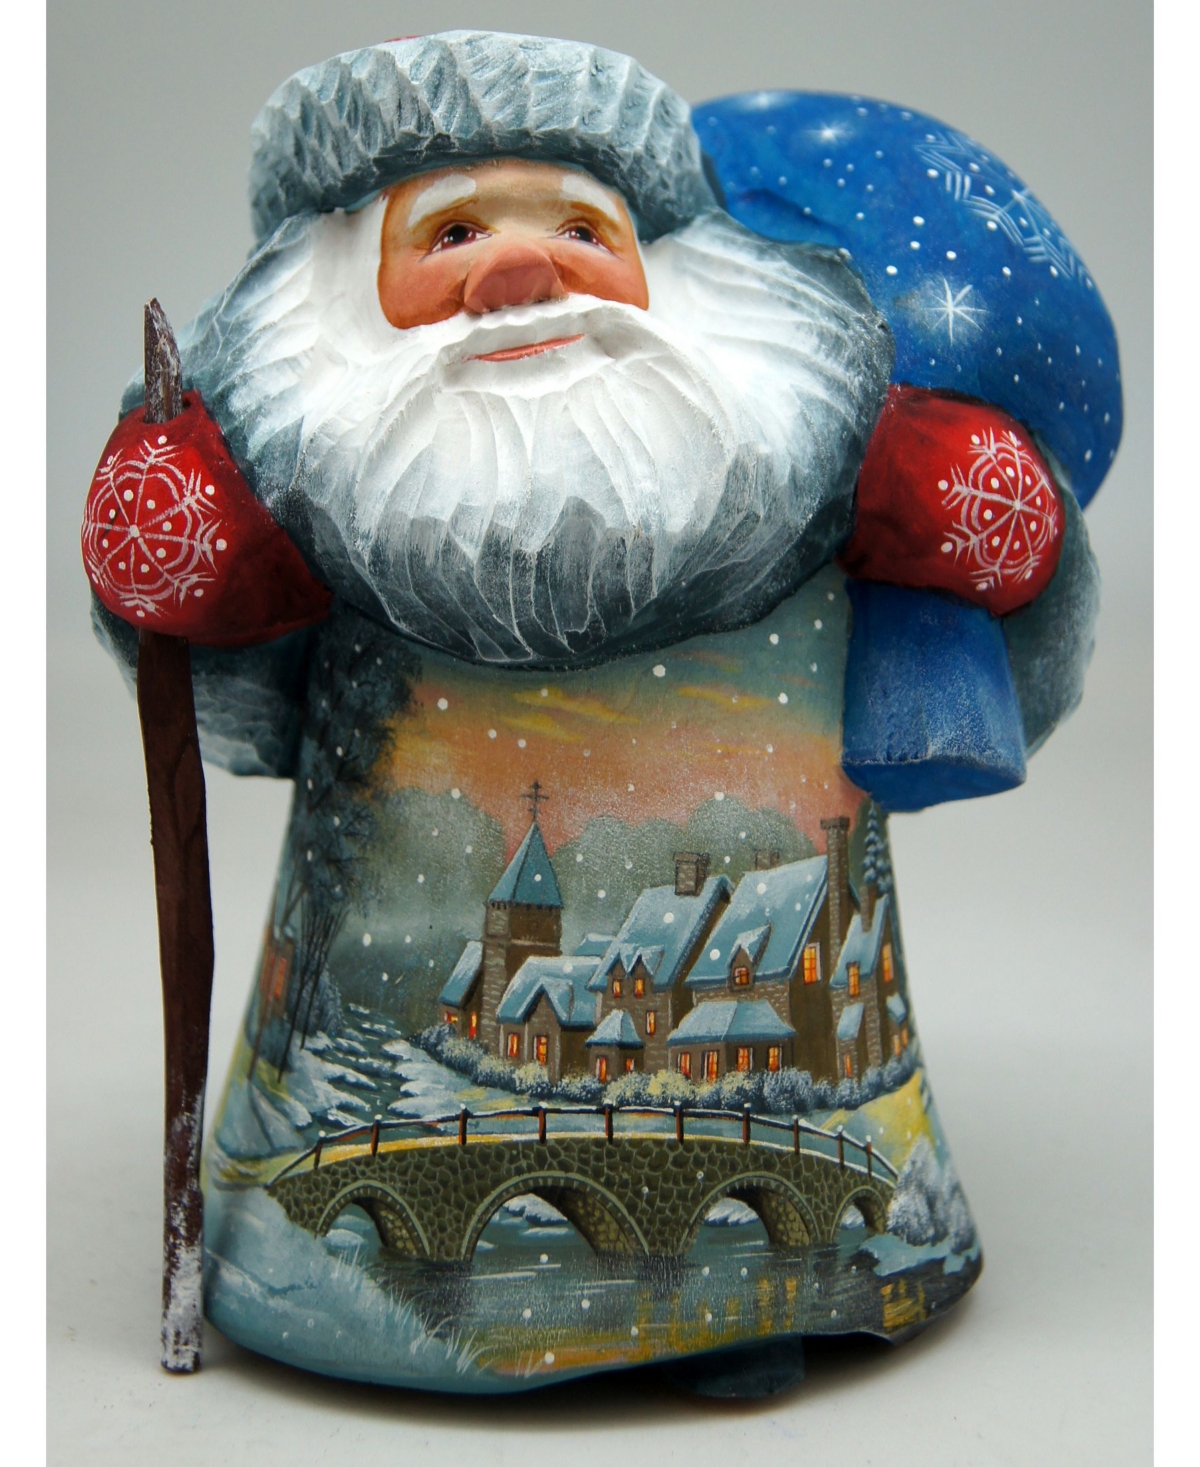 Woodcarved and Hand Painted Frosted Village Bridge Santa Figurine - Multi